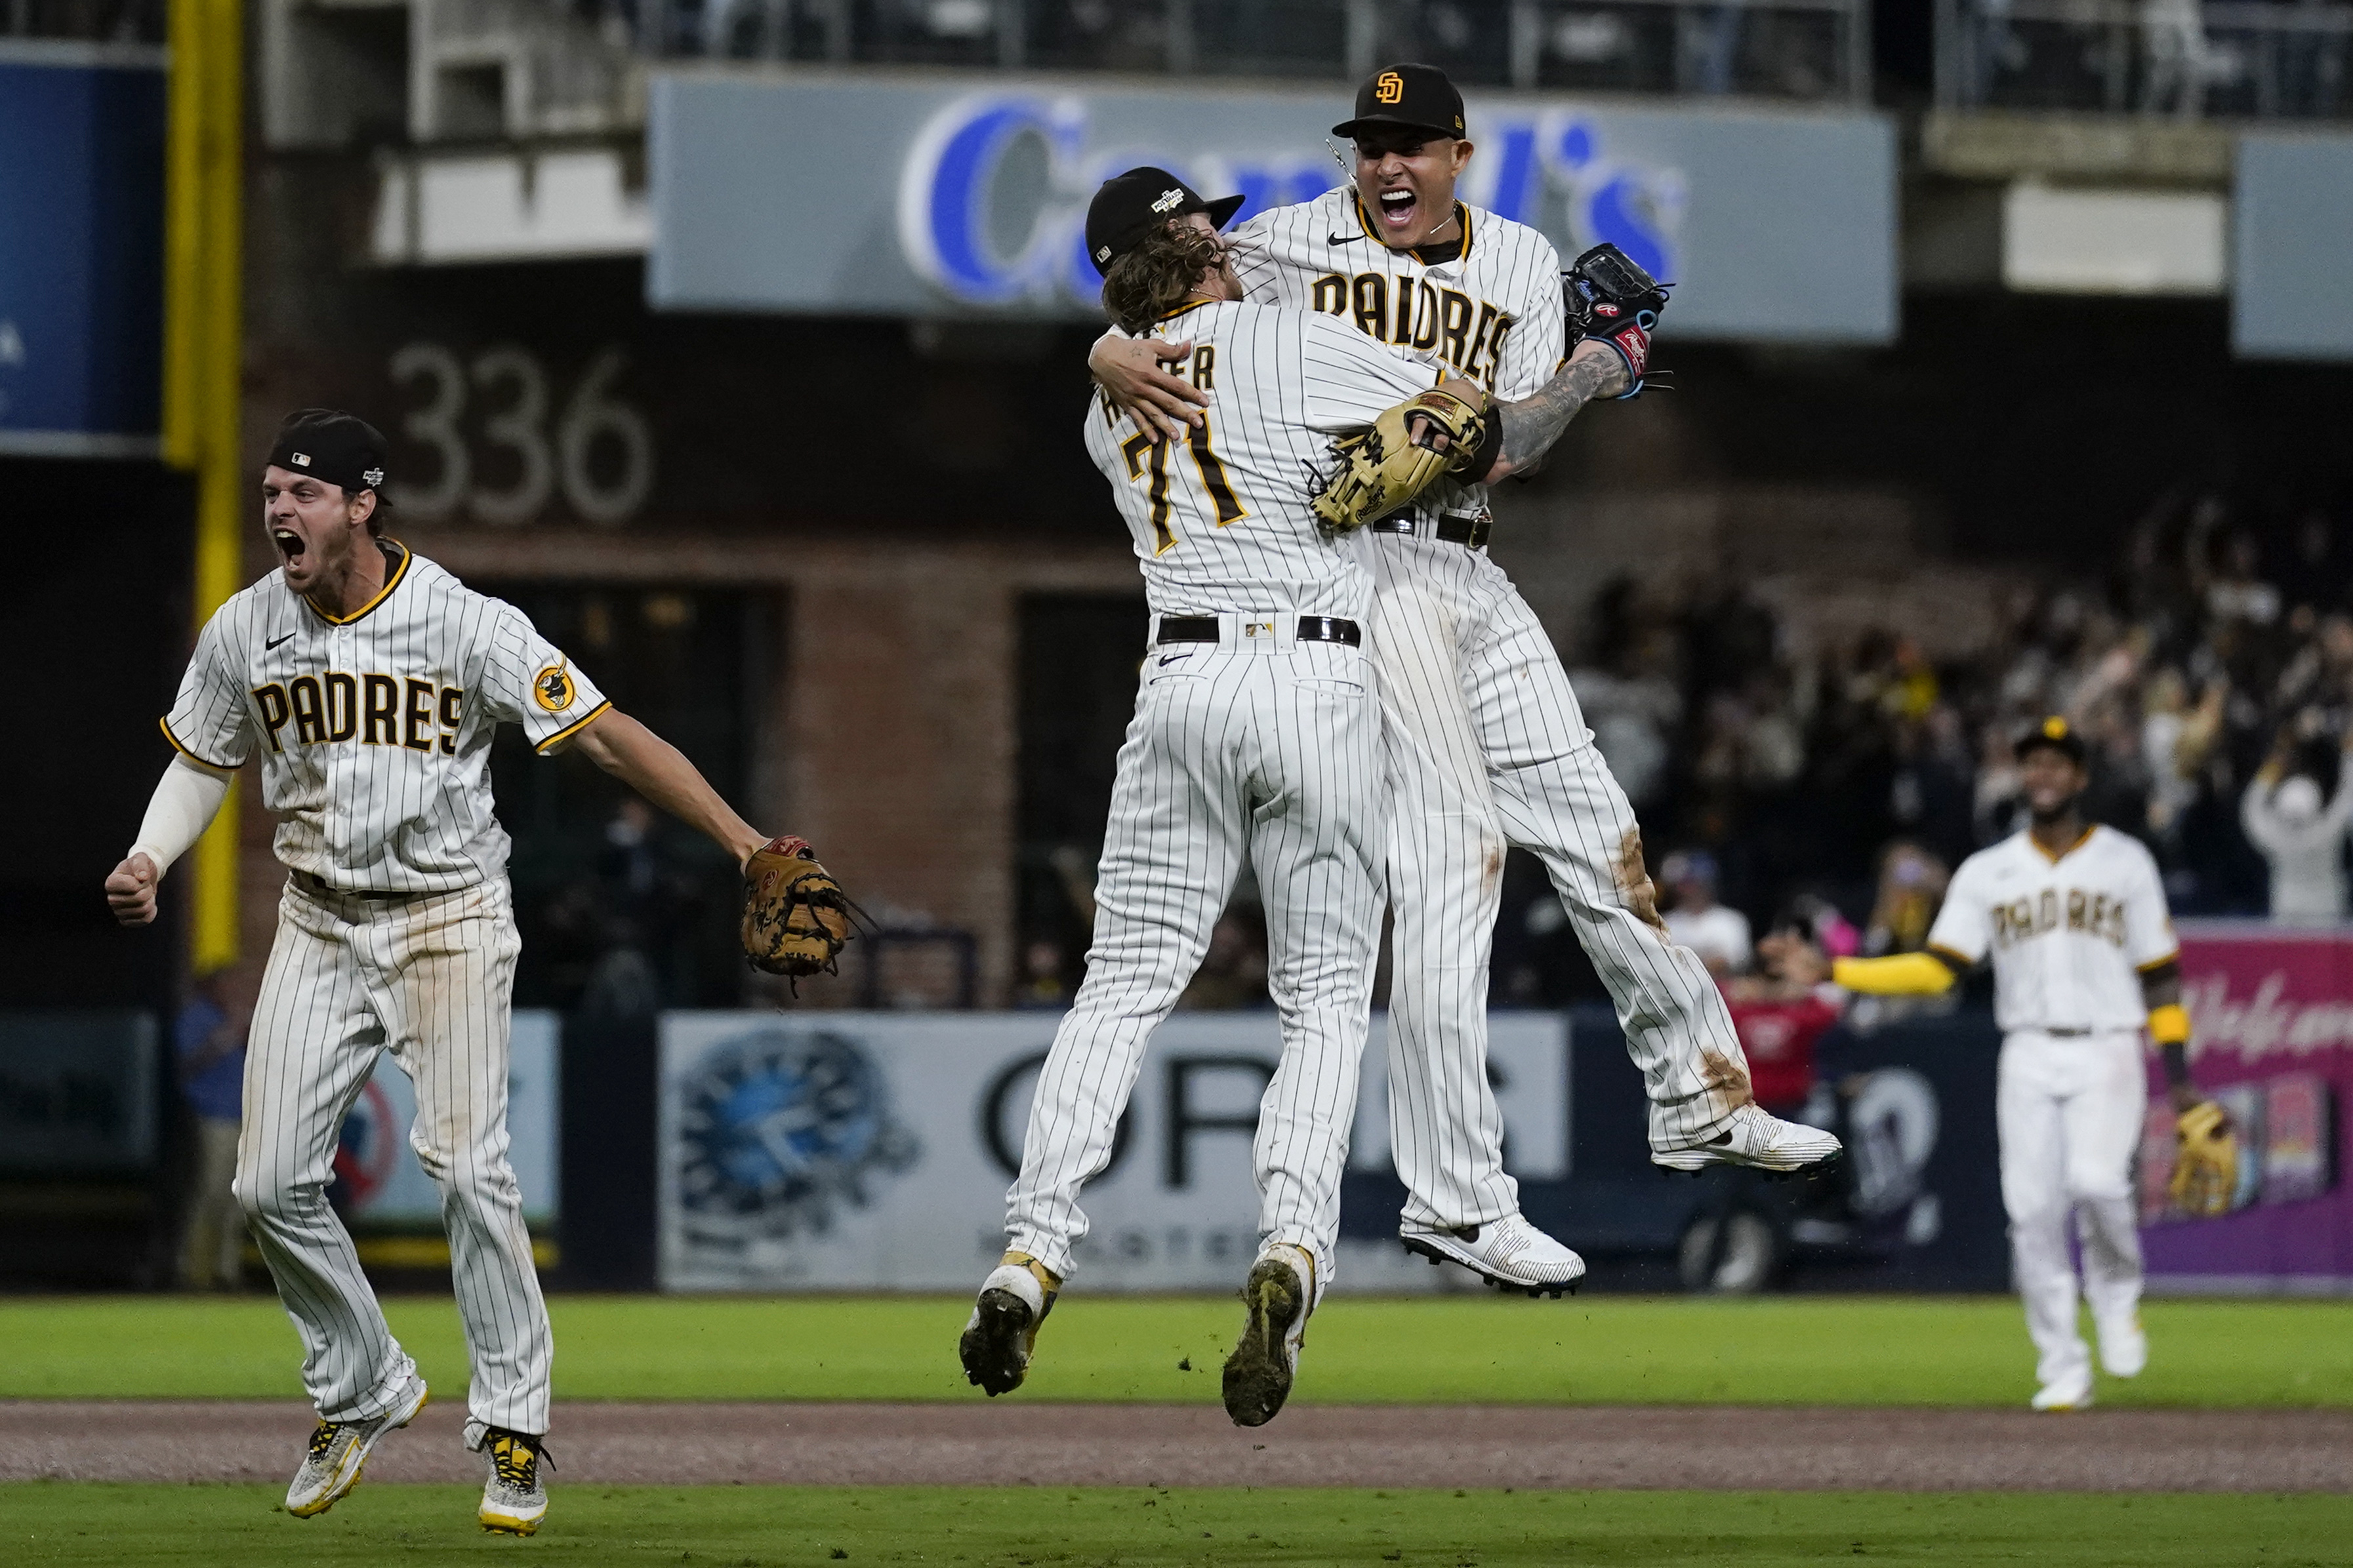 Philadelphia Phillies vs San Diego Padres How to watch 2022 NLCS, TV, streaming schedule